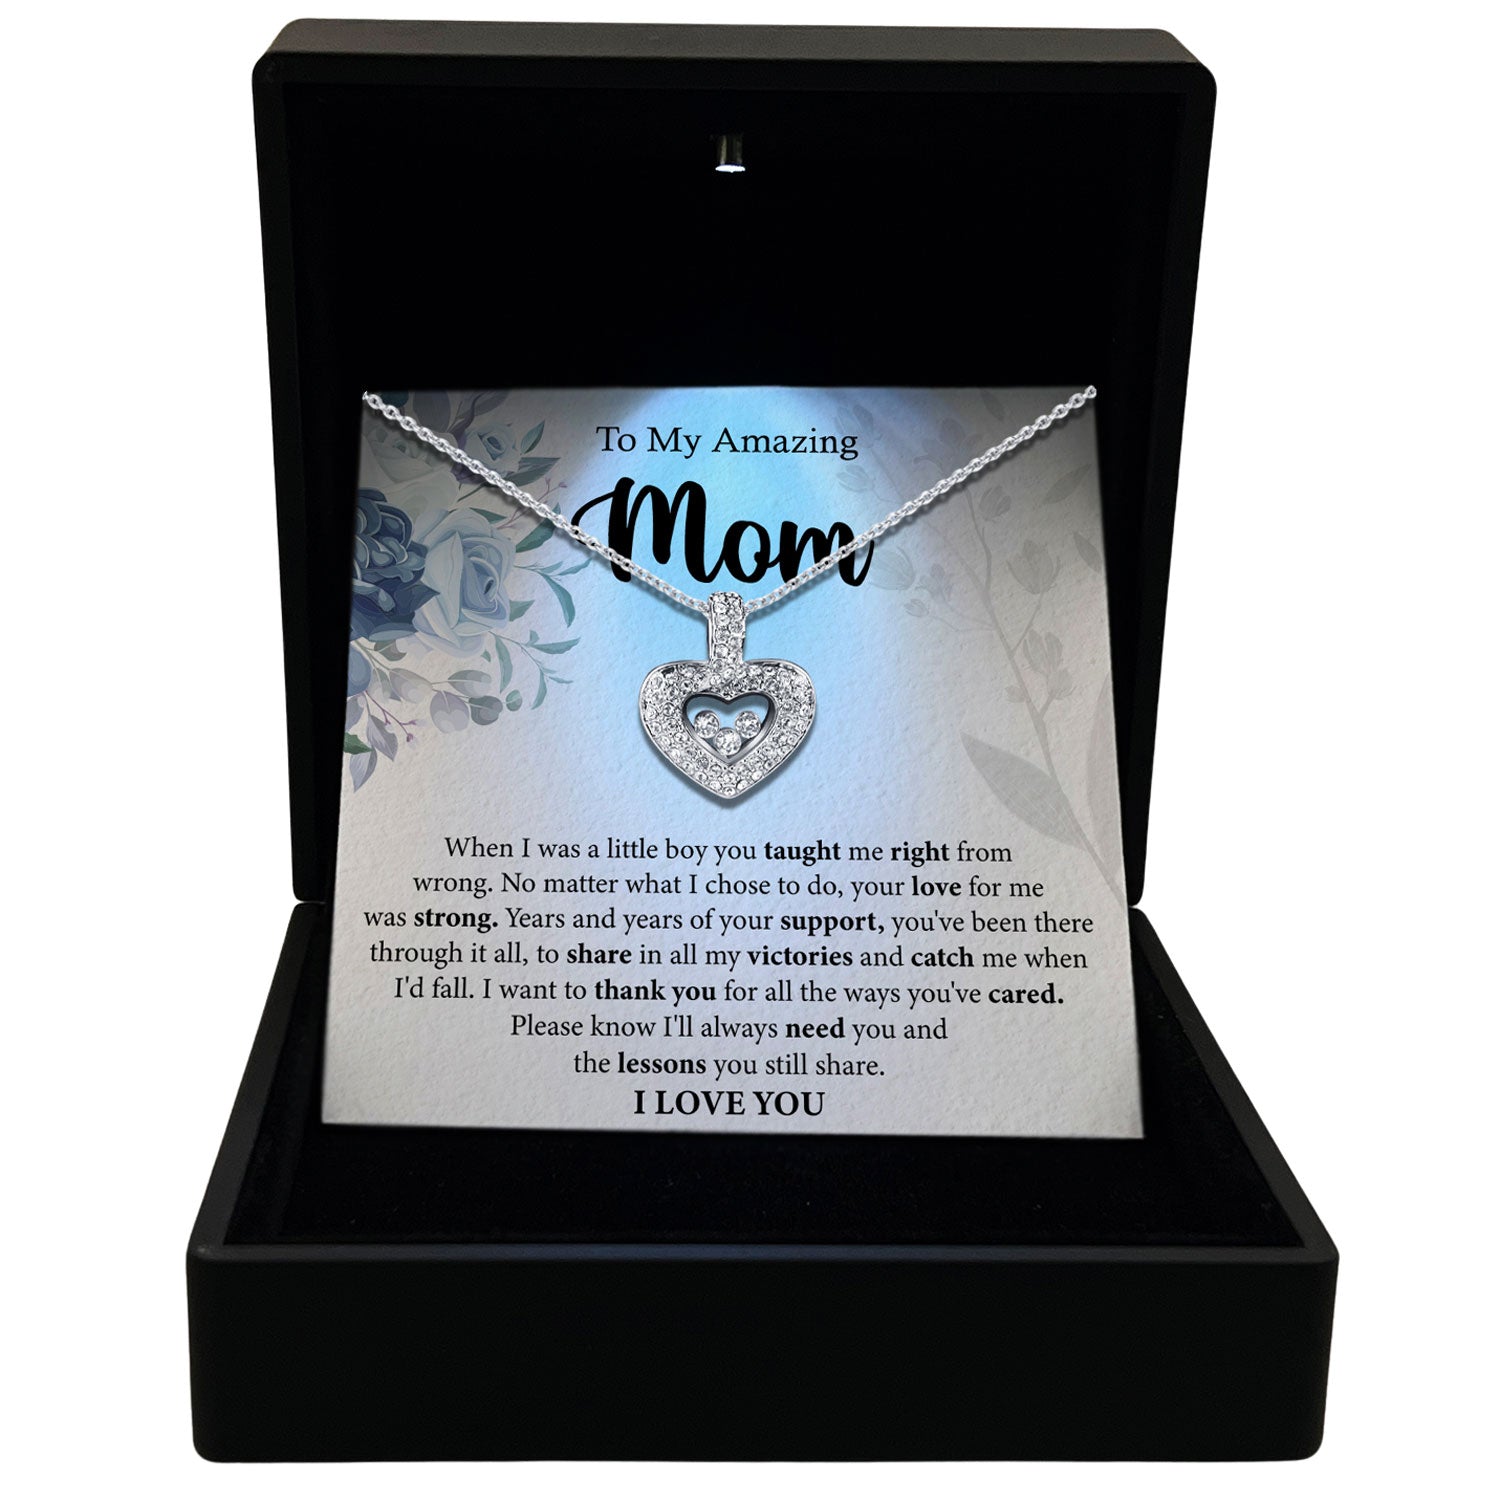 To My Amazing Mom - I Will Always Need Your Lessons You Still Share - Tryndi Floating Heart Necklace